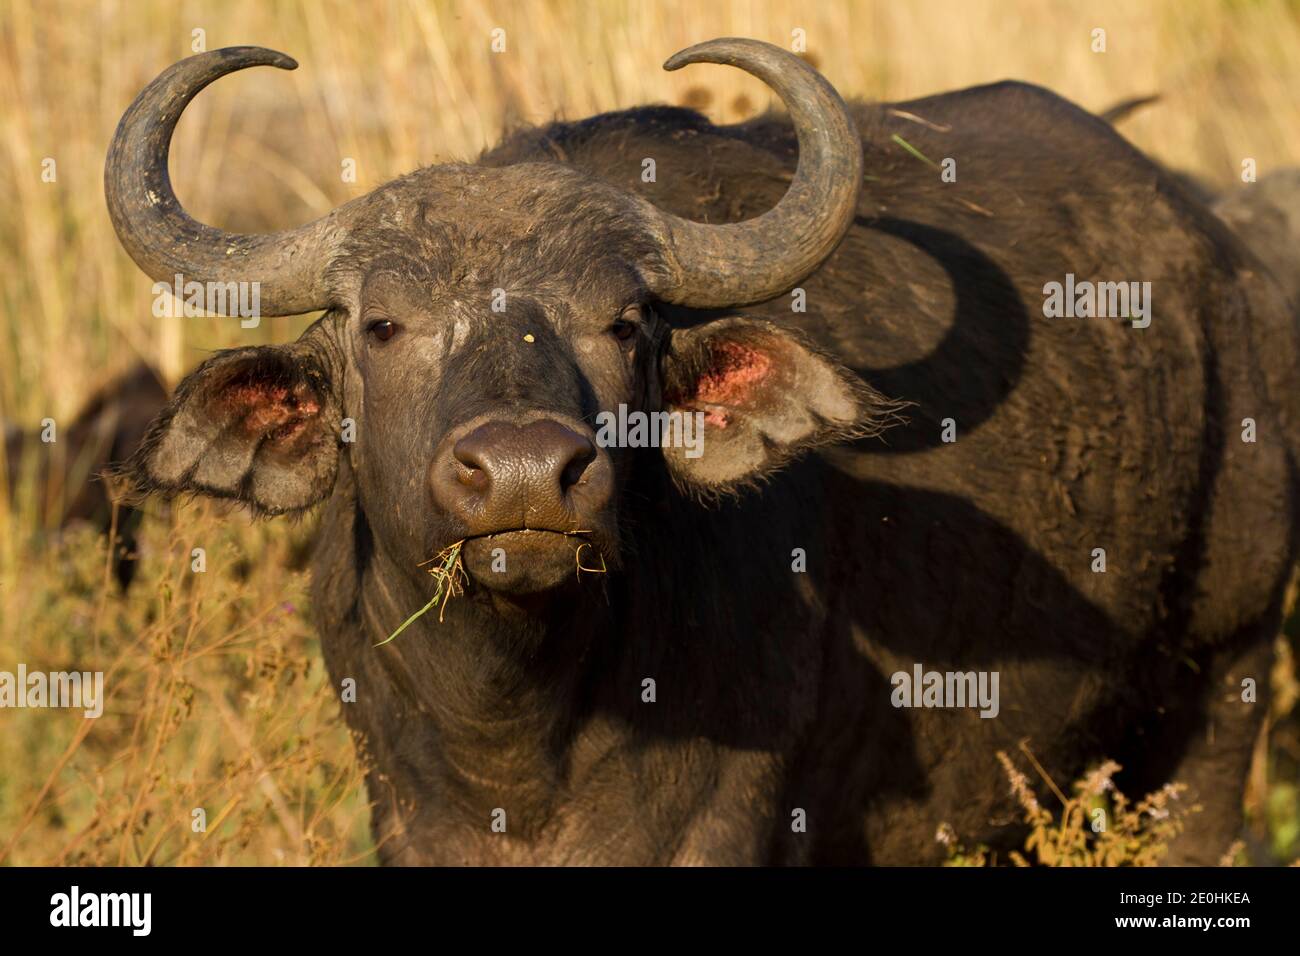 African or Cape Buffalo (Syncerus caffer) Stock Photo